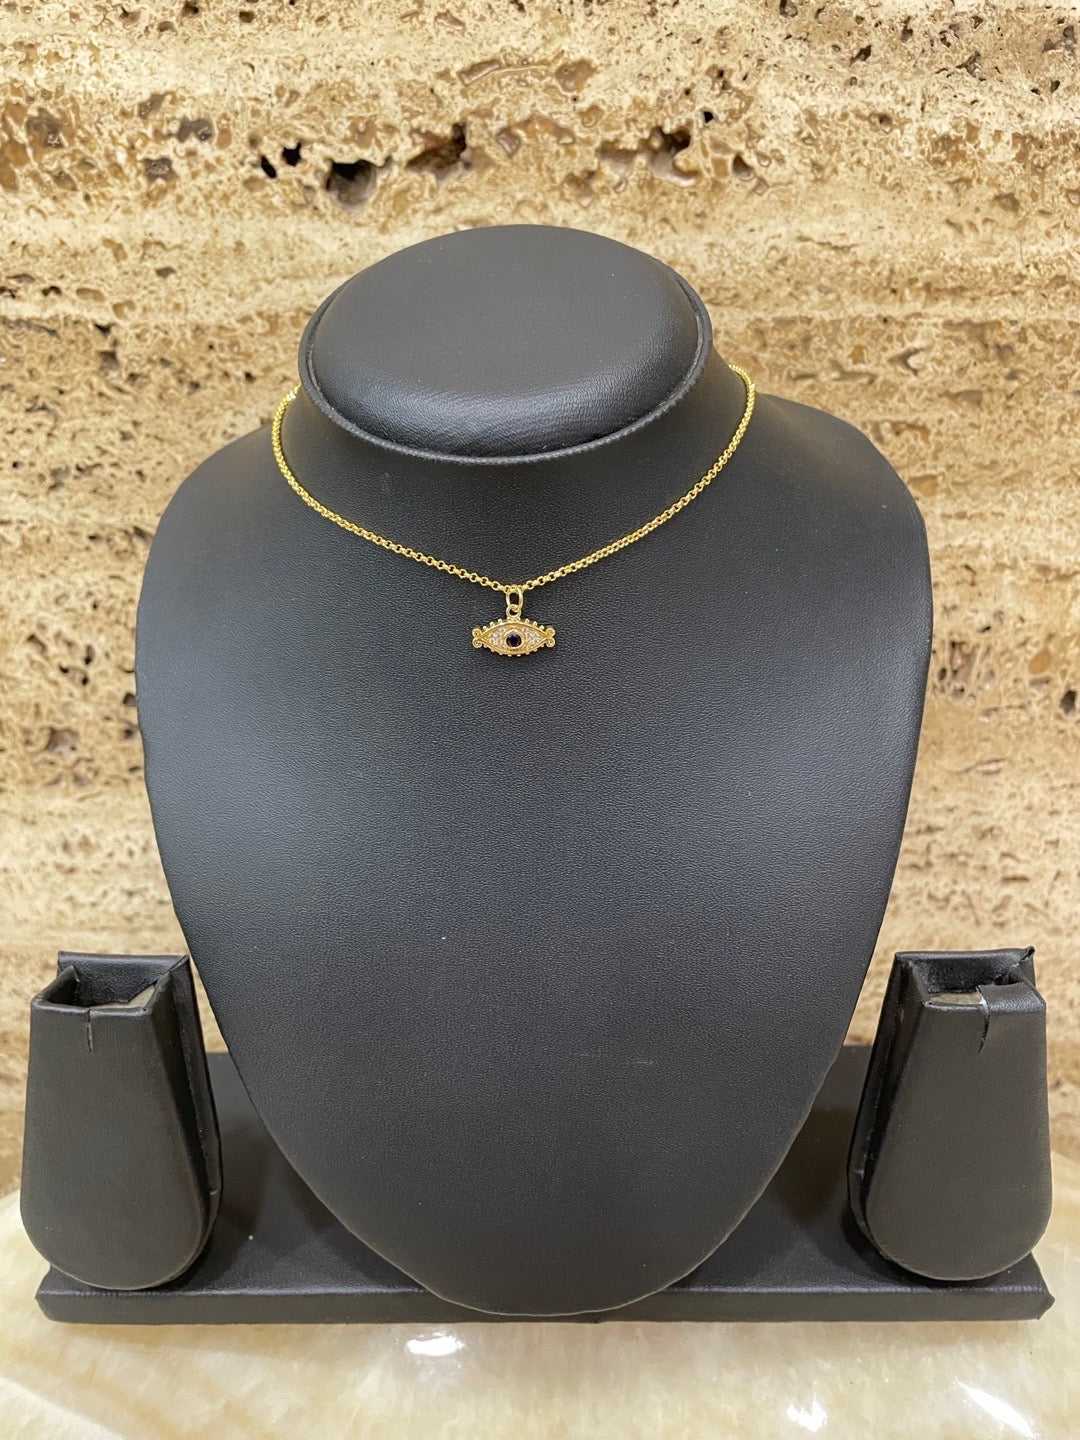 Gold Plated Choker Necklace EvilEye Design AD Pendant